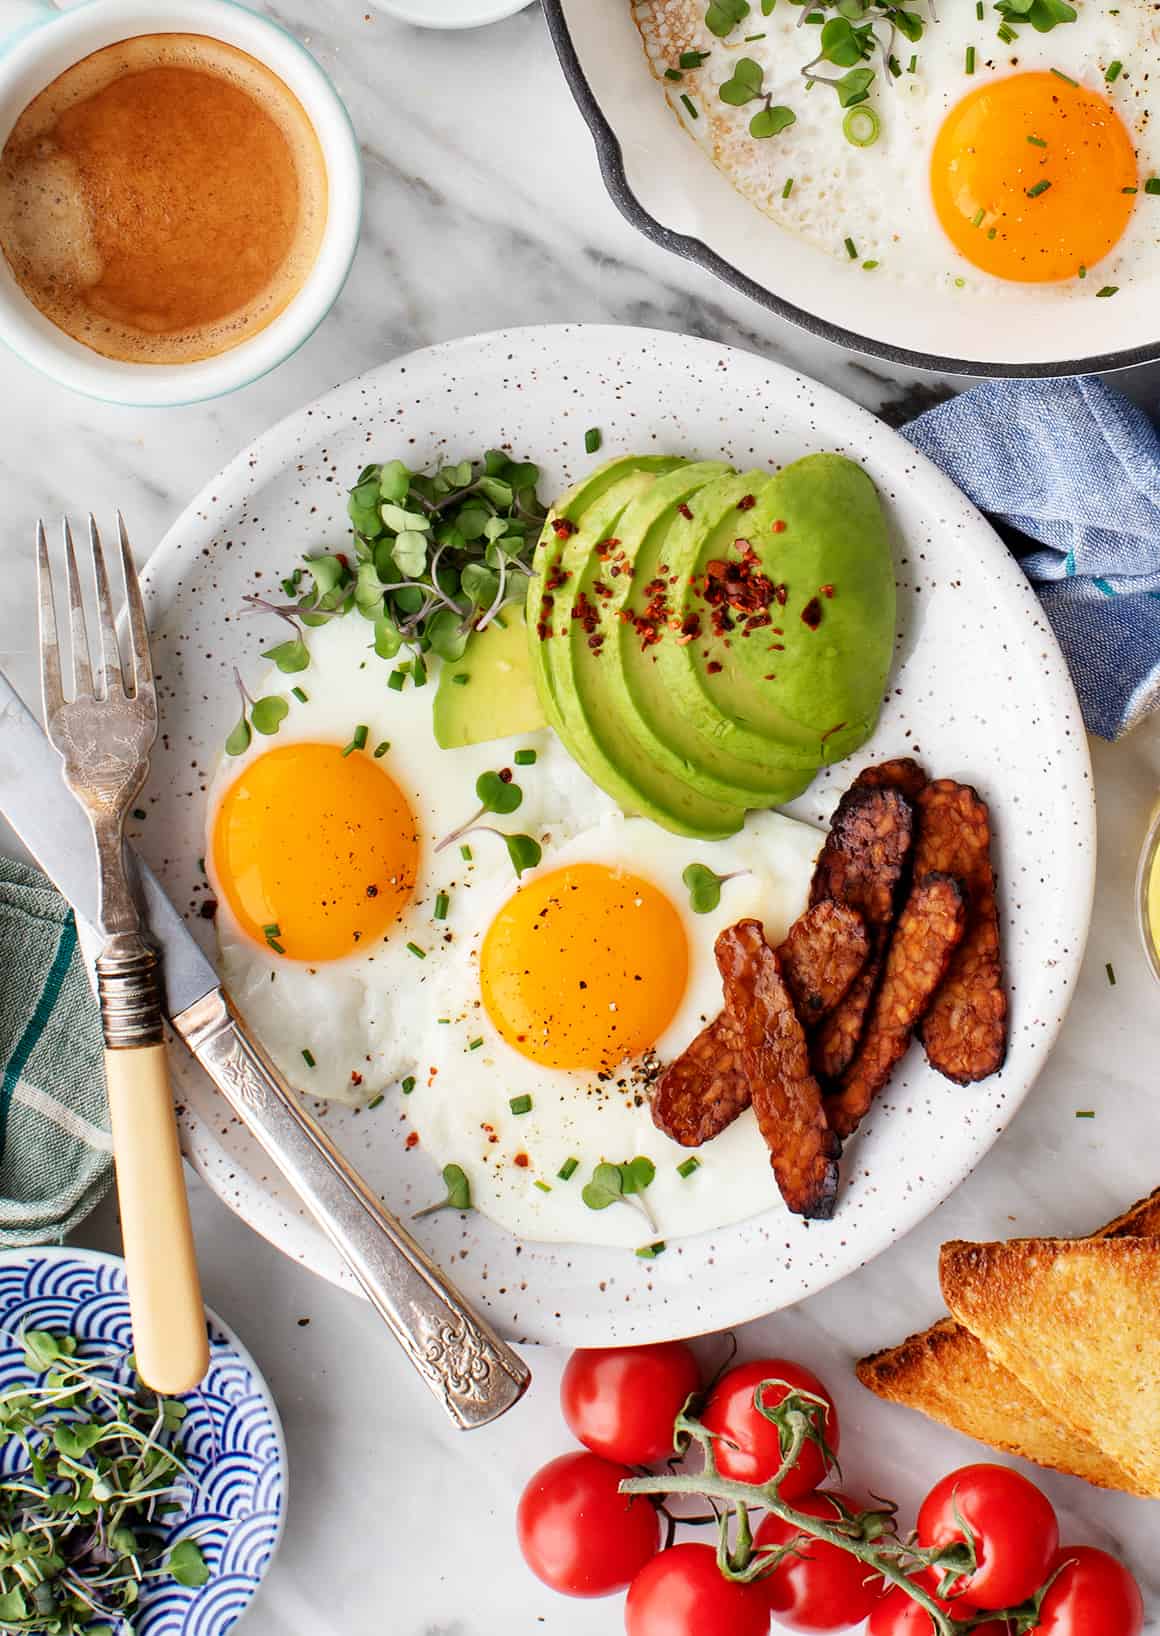 Sunny Side up Eggs with avocado and toast